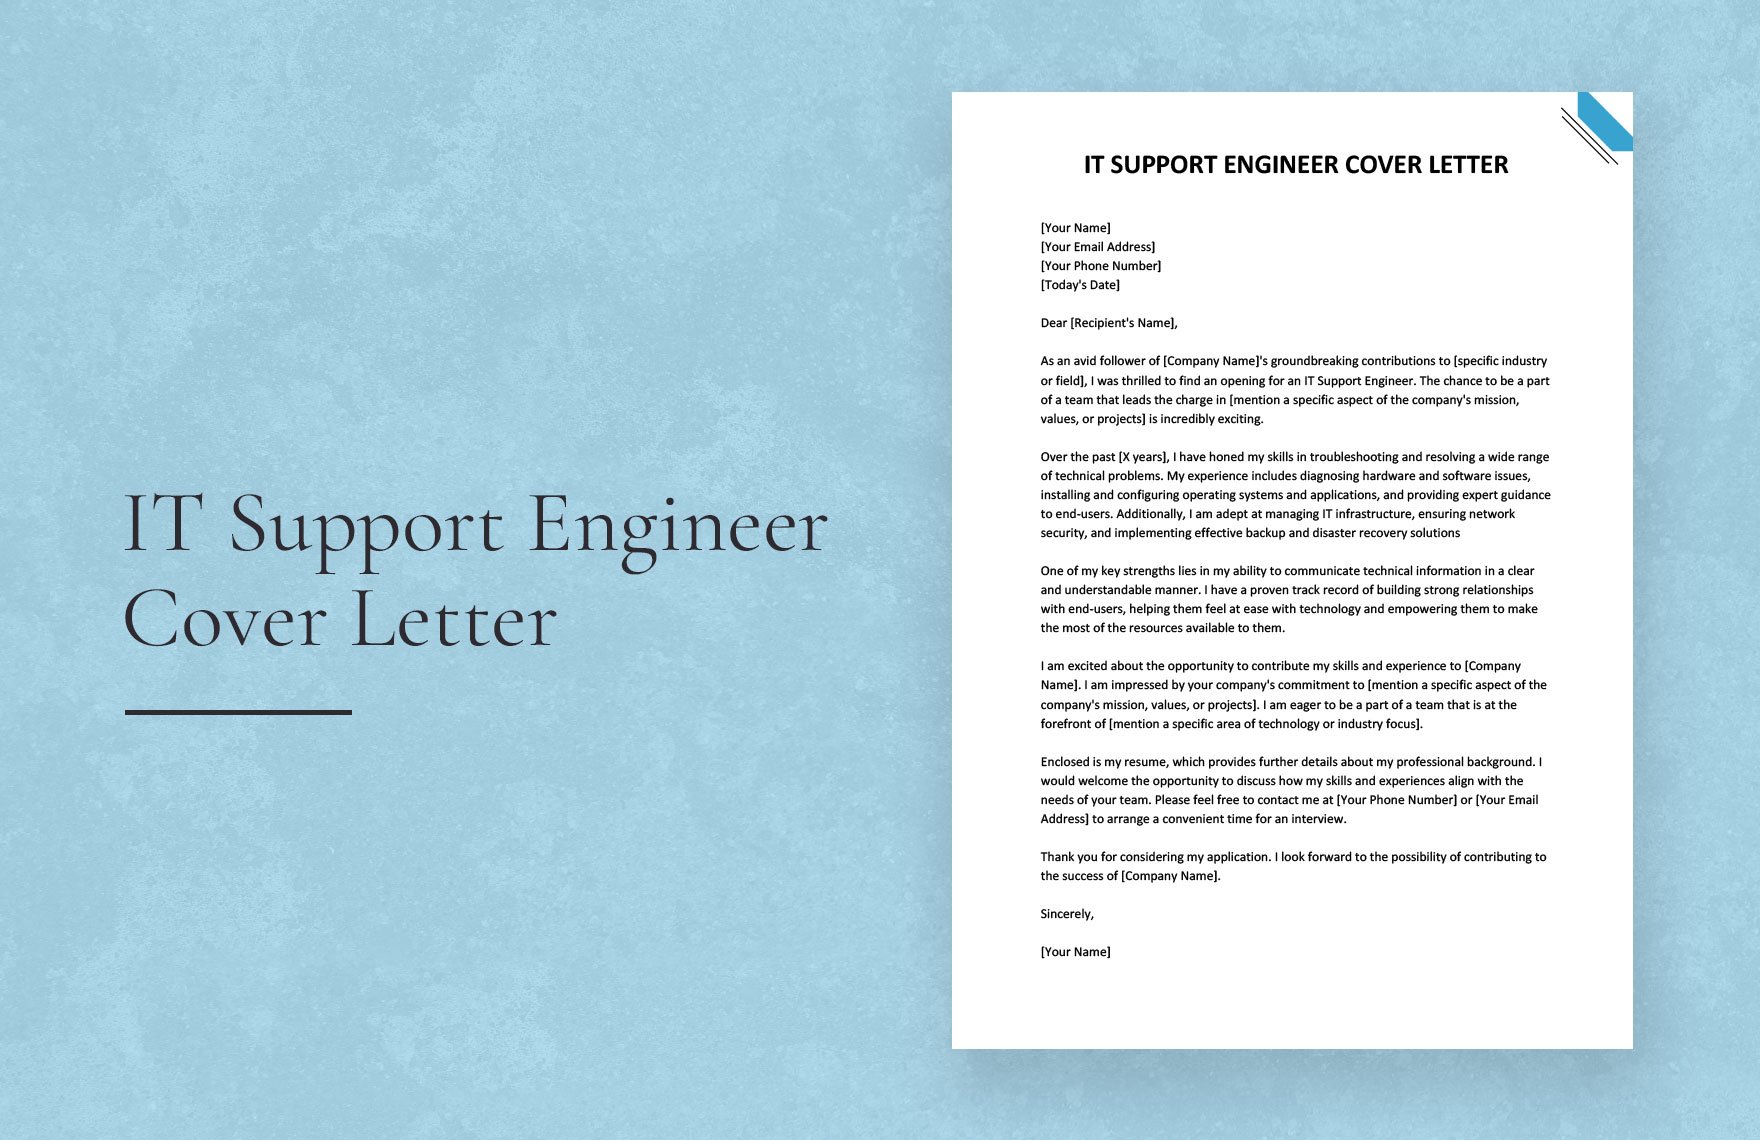 IT Support Engineer Cover Letter